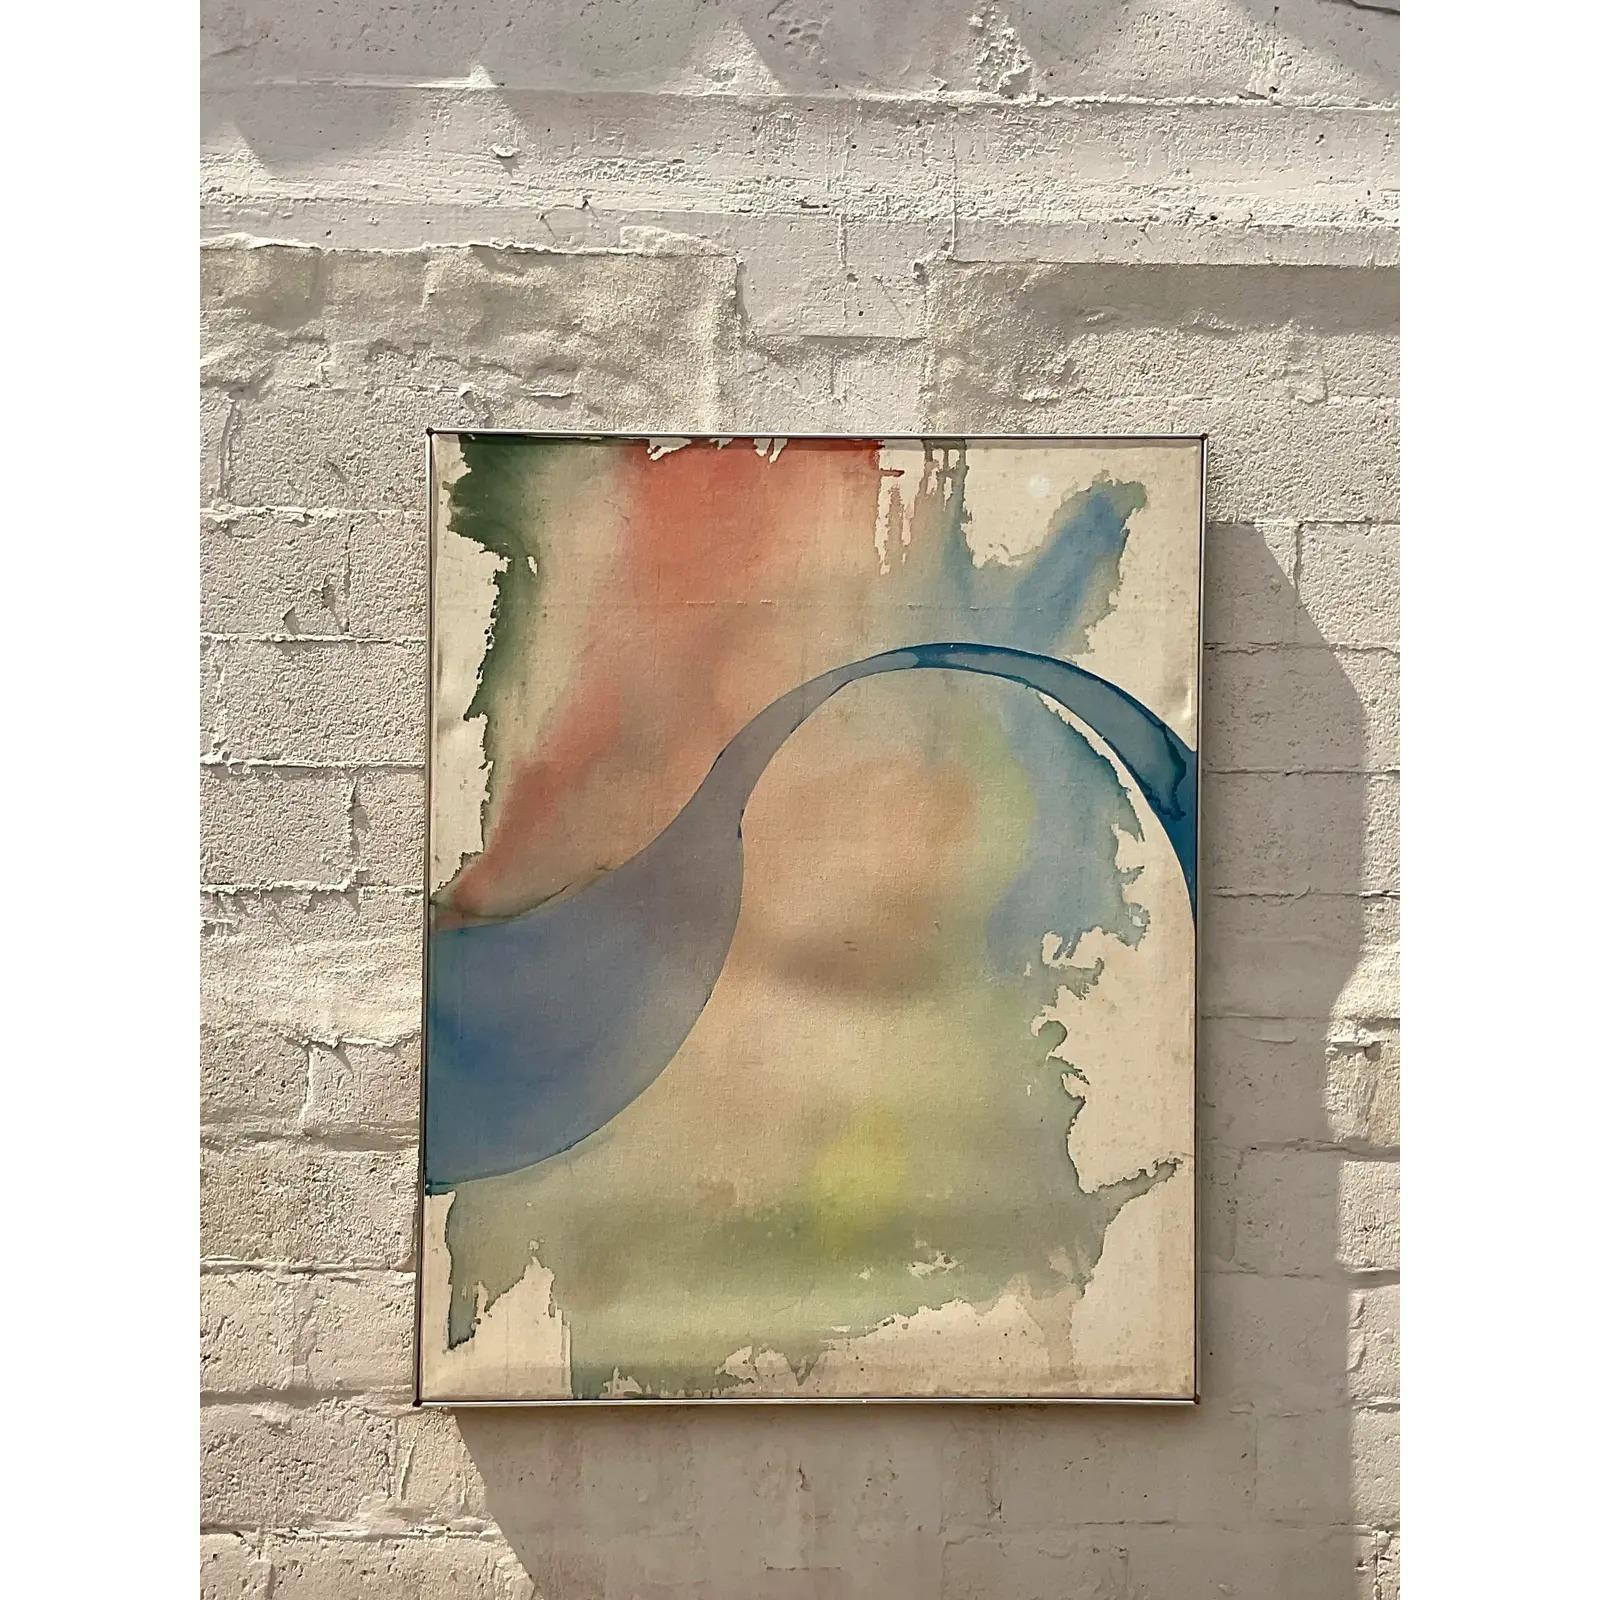 Fantastic vintage 70s Oil painting. A stunning abstract signed and dated by the artist on the back frame. Acquired from a Palm Beach estate.